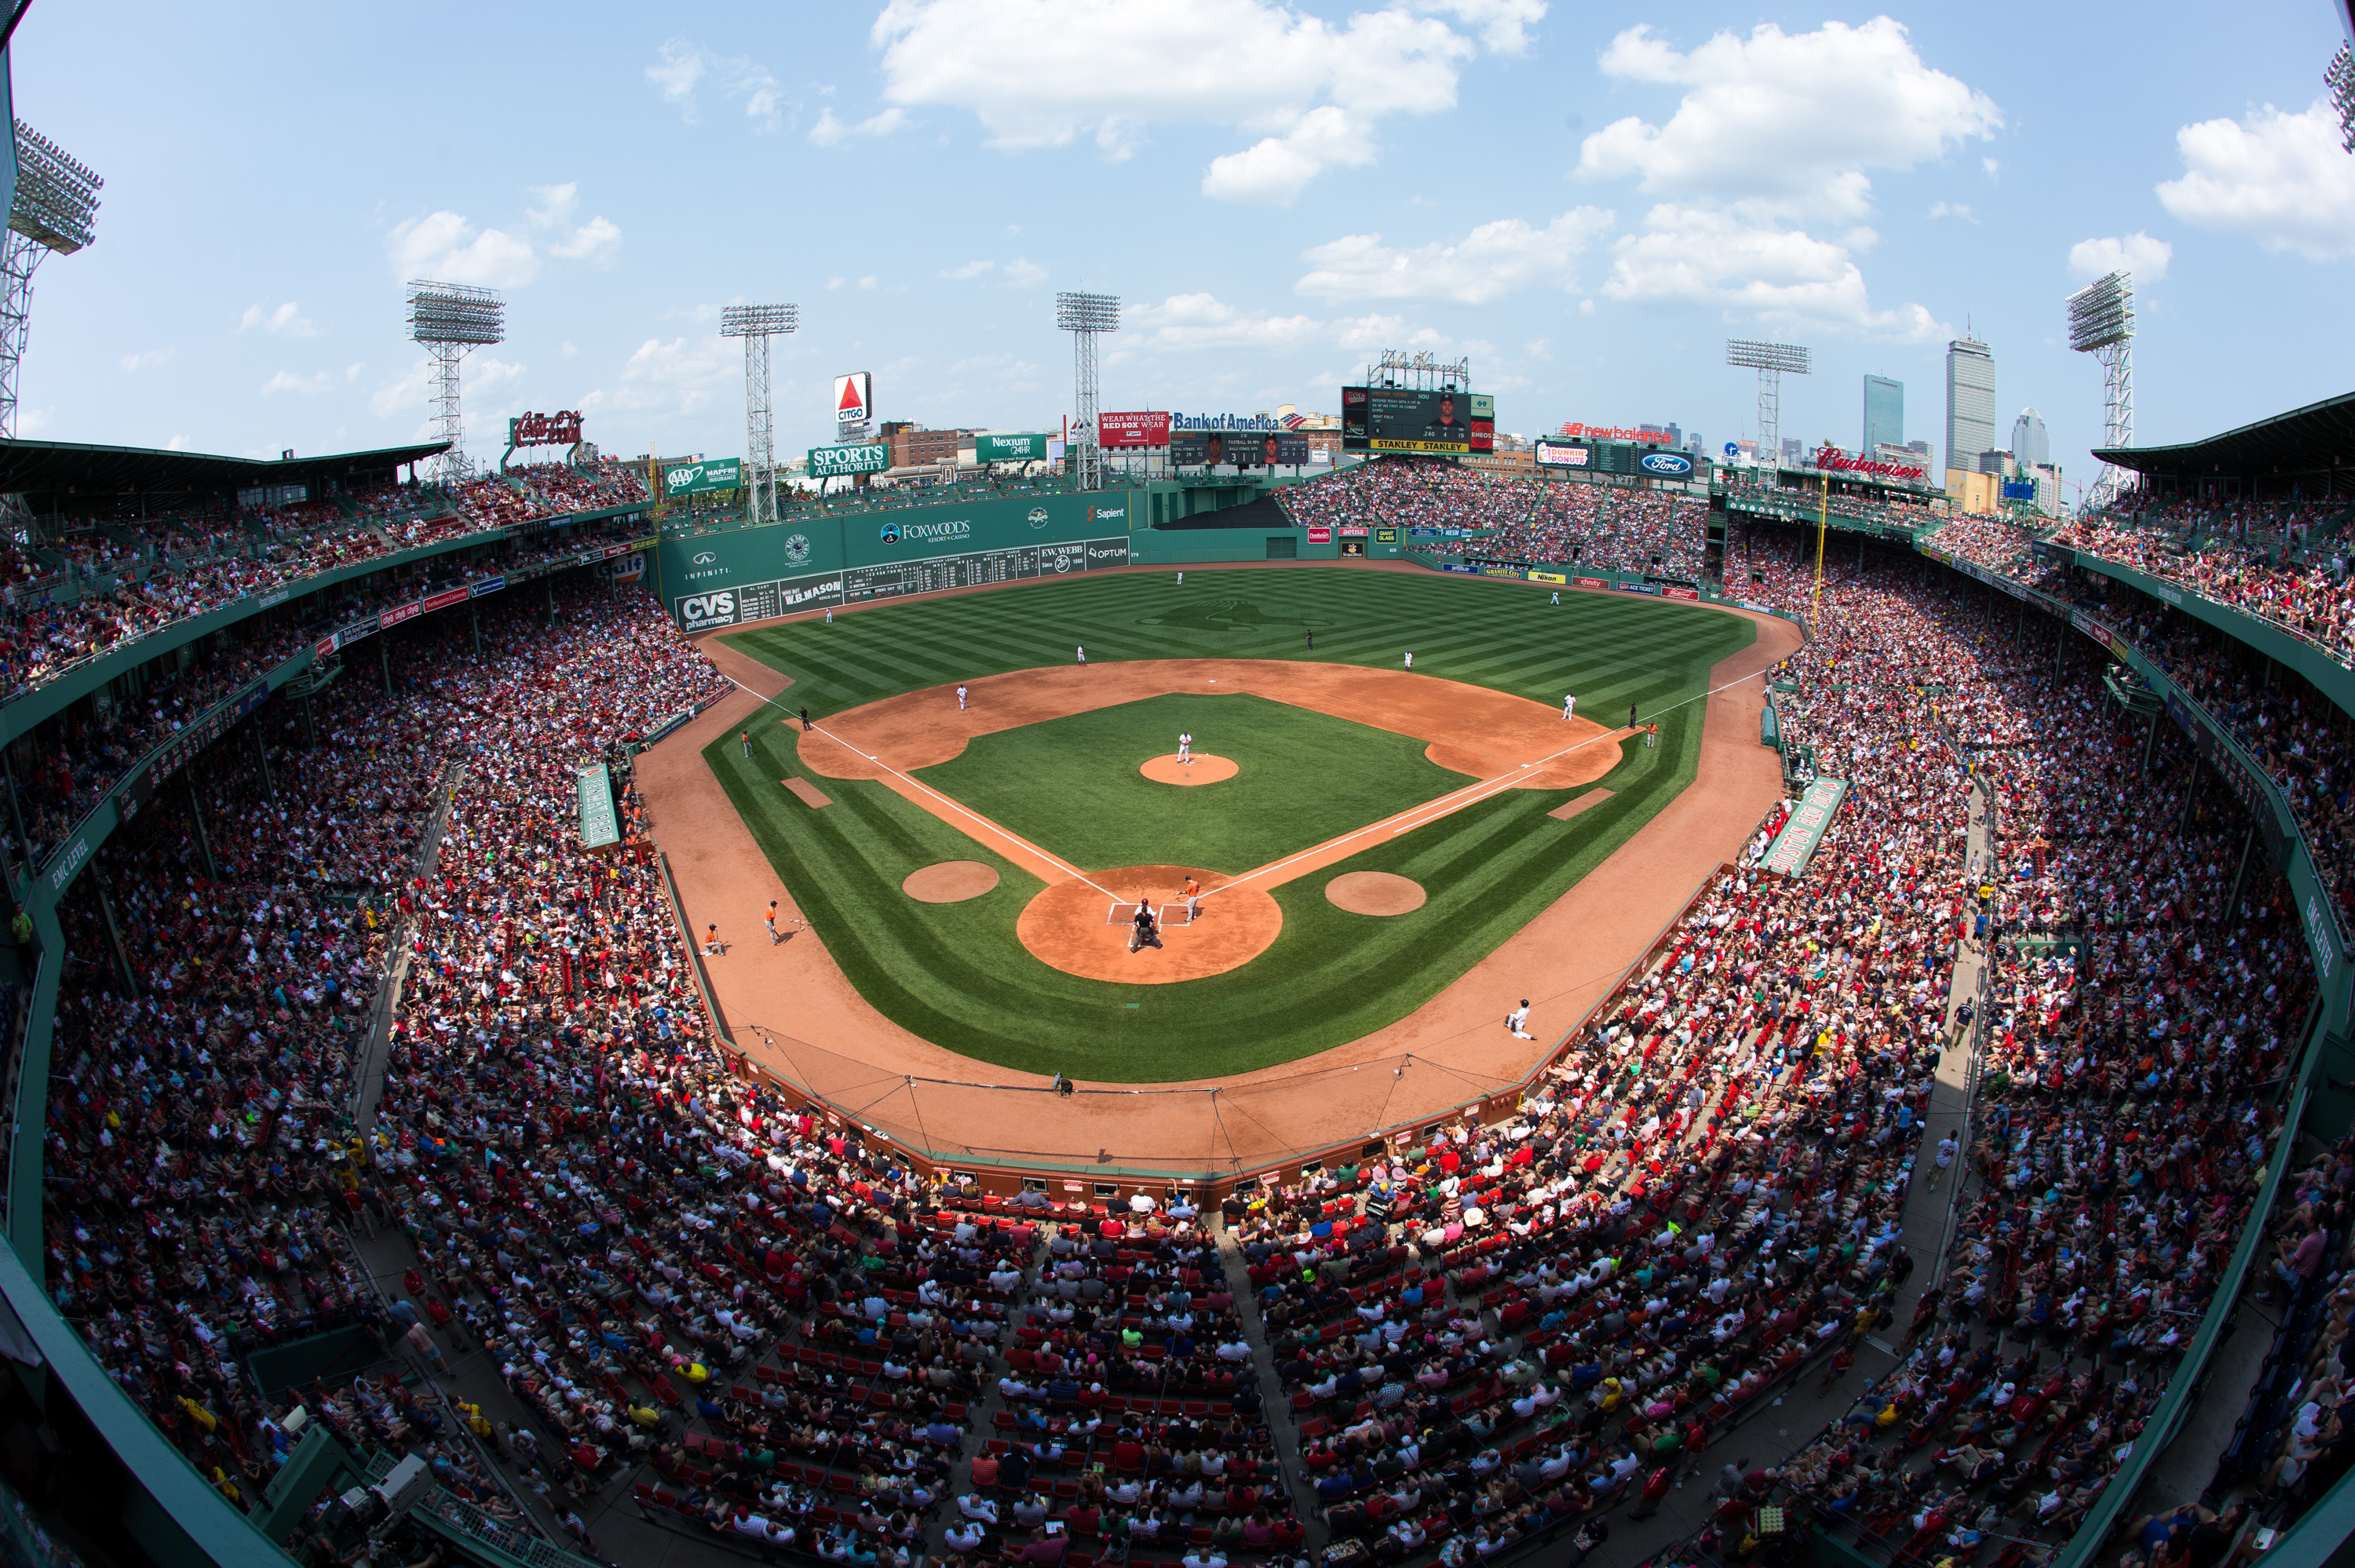 The Boston Red Sox play a game against the Houston Astros at Fenway Park on July 5, 2015 in Boston, Massachusetts. (Rich Gagnon—Getty Images)